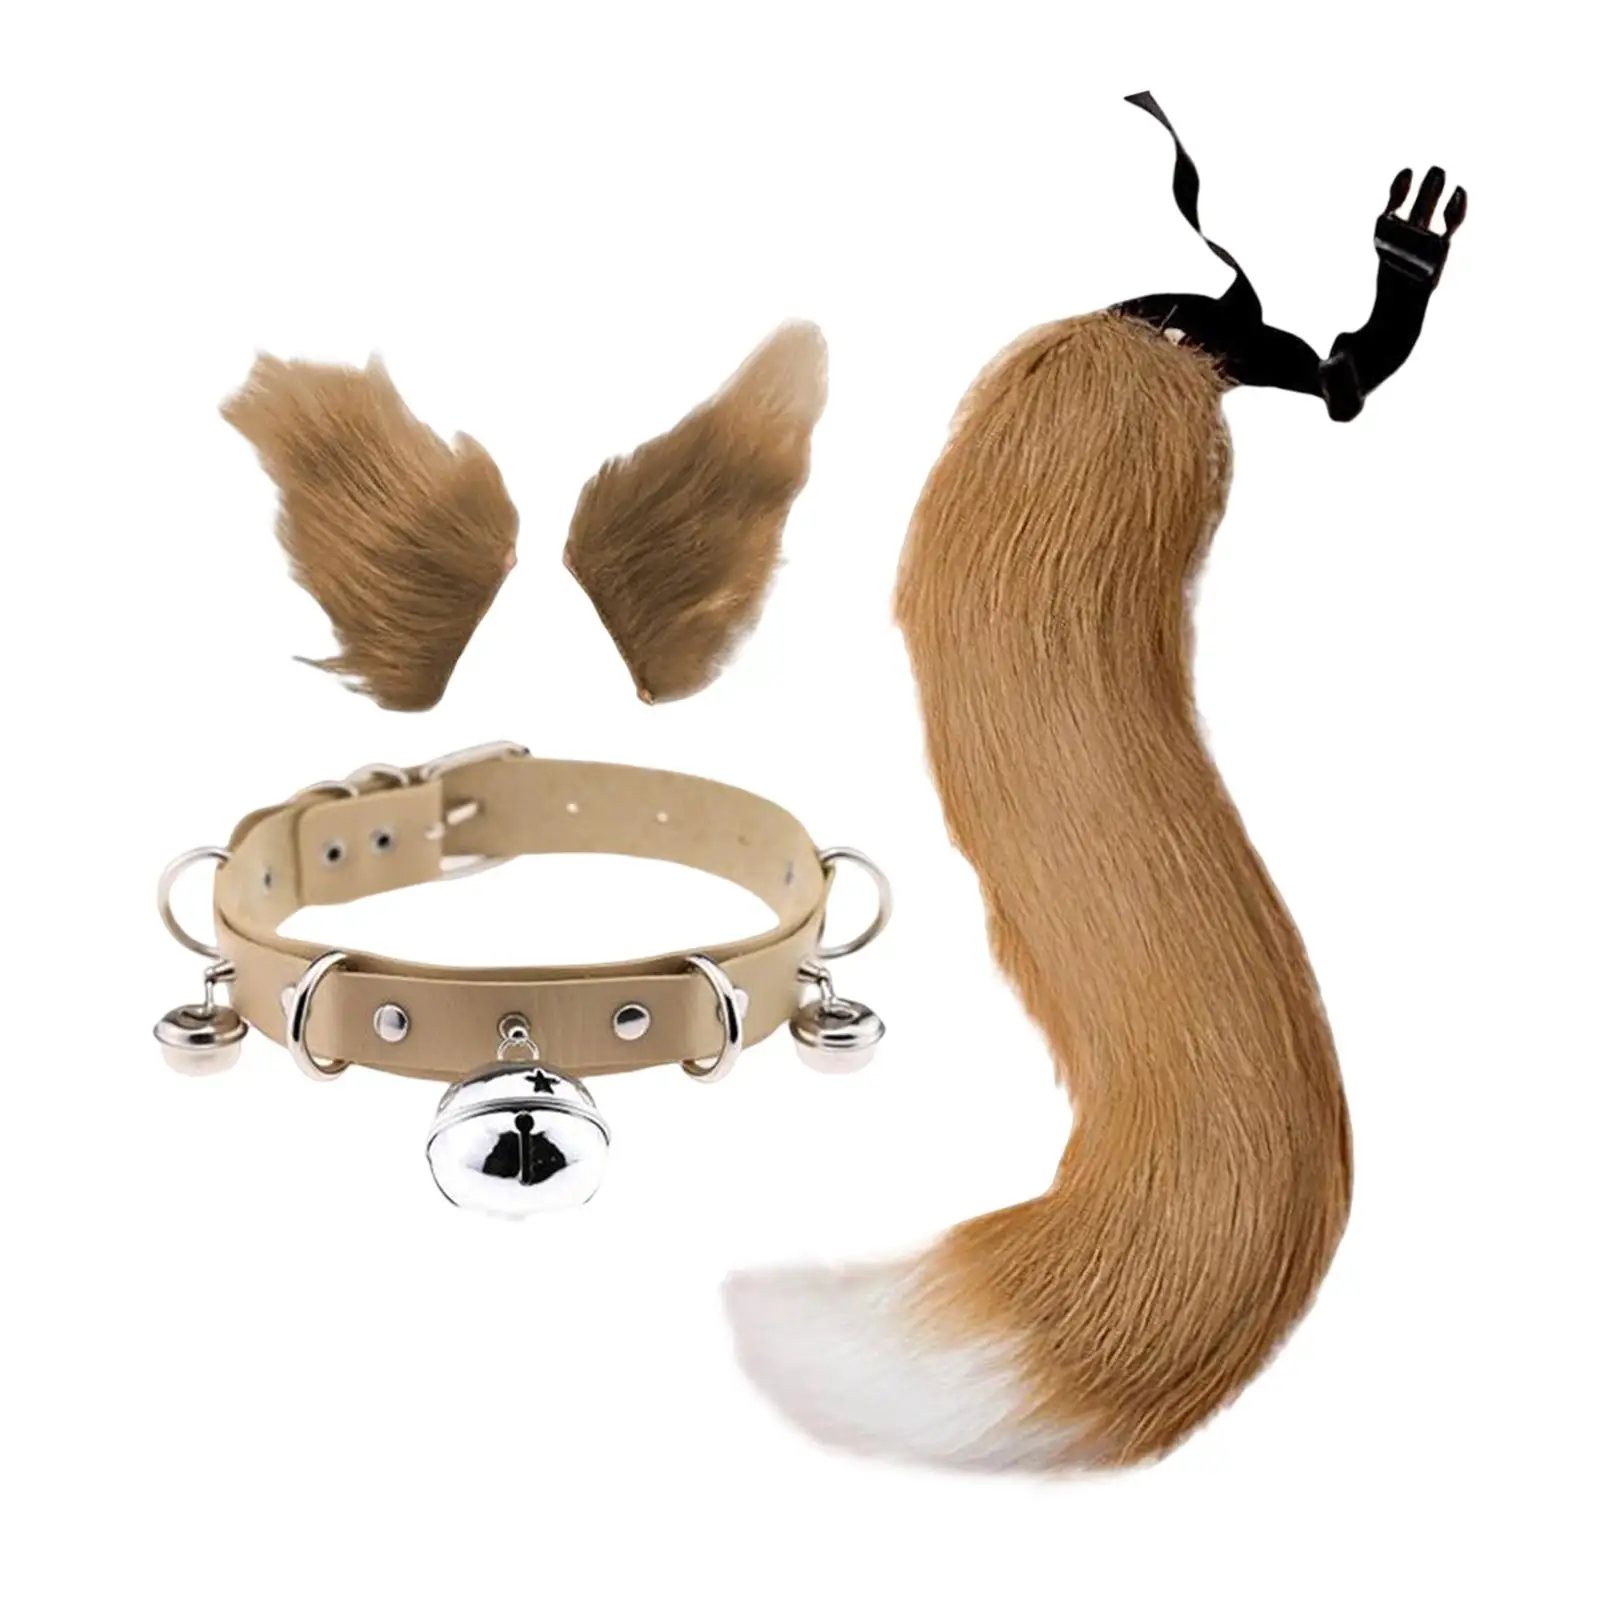 4Pcs Animal Fox Ears and Tail Set Faux Fur Long Tails Leather Choker Set Anime Cosplay Costume Kits Party Christmas